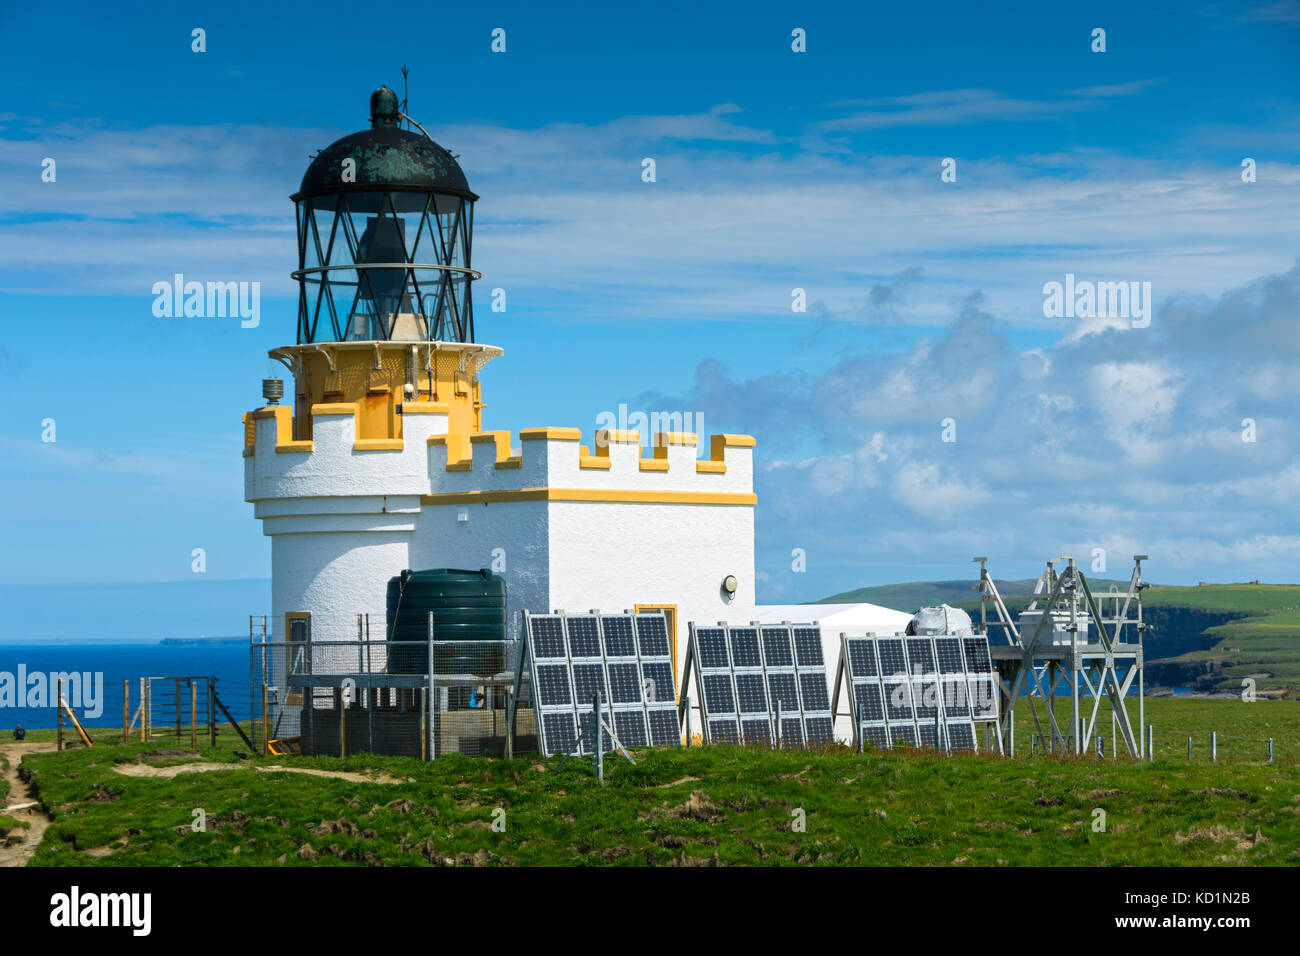 The Brough of Birsay Lighthouse, built 1925. Brough of Birsay, Orkney, Scotland, UK. Stock Photo